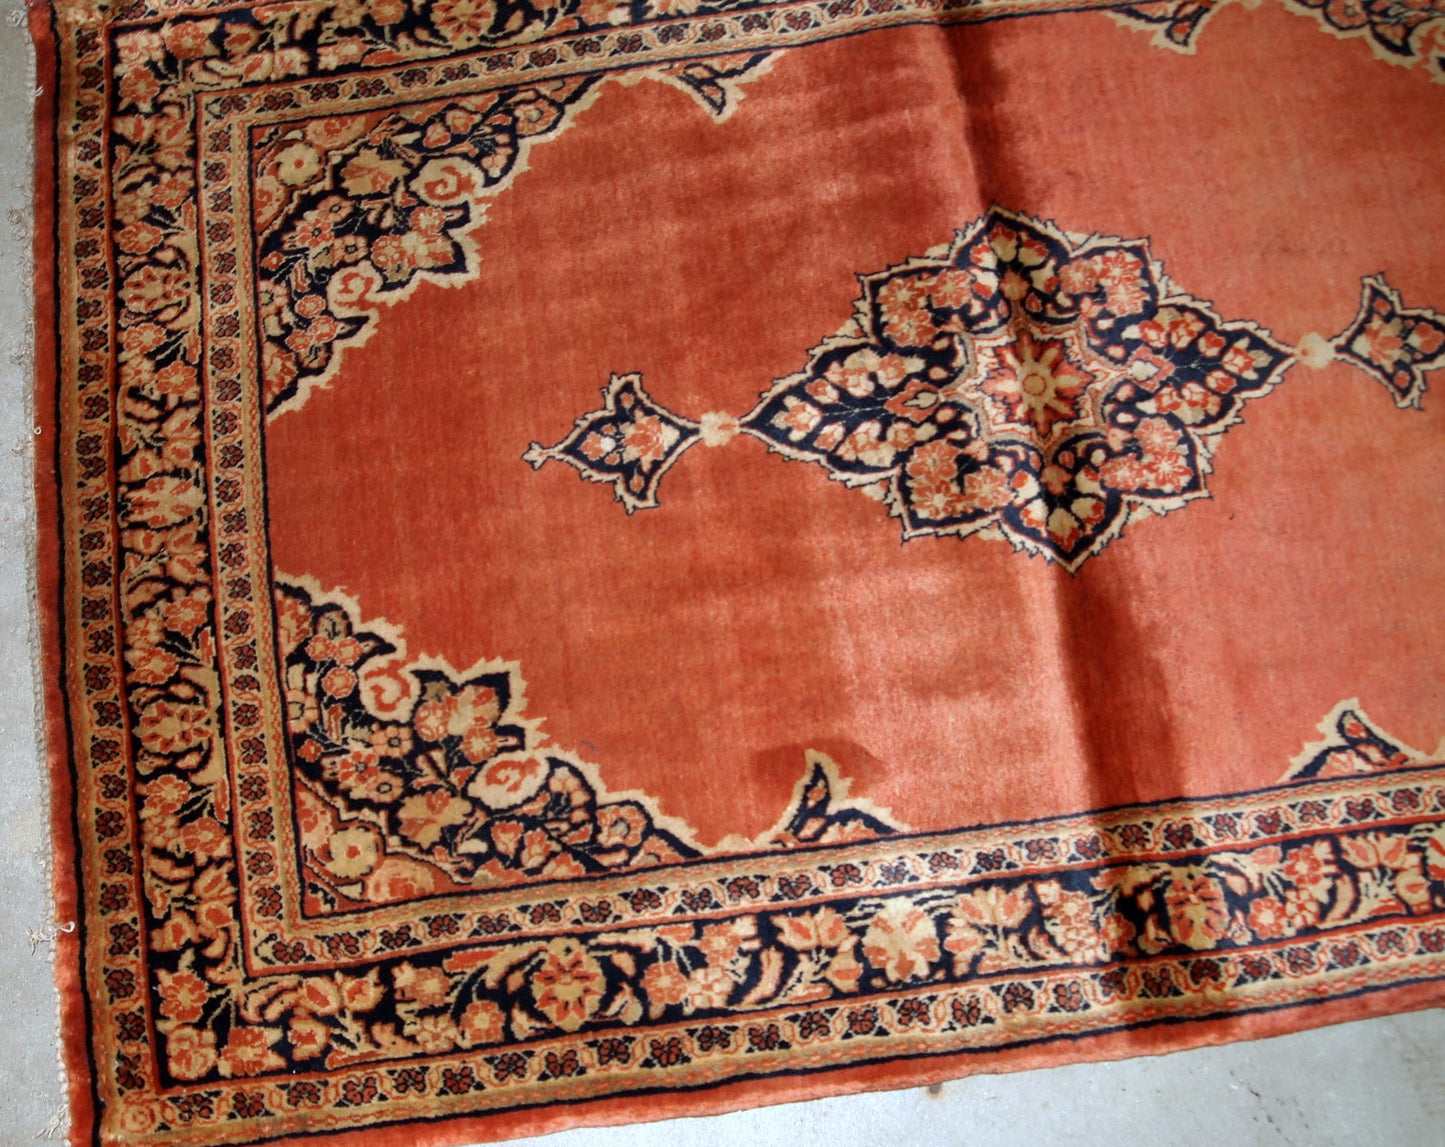 Hand-weaved antique Sarouk rug from the beginning of 20th century. The rug is in original good condition, made in traditional design from the shiny wool.